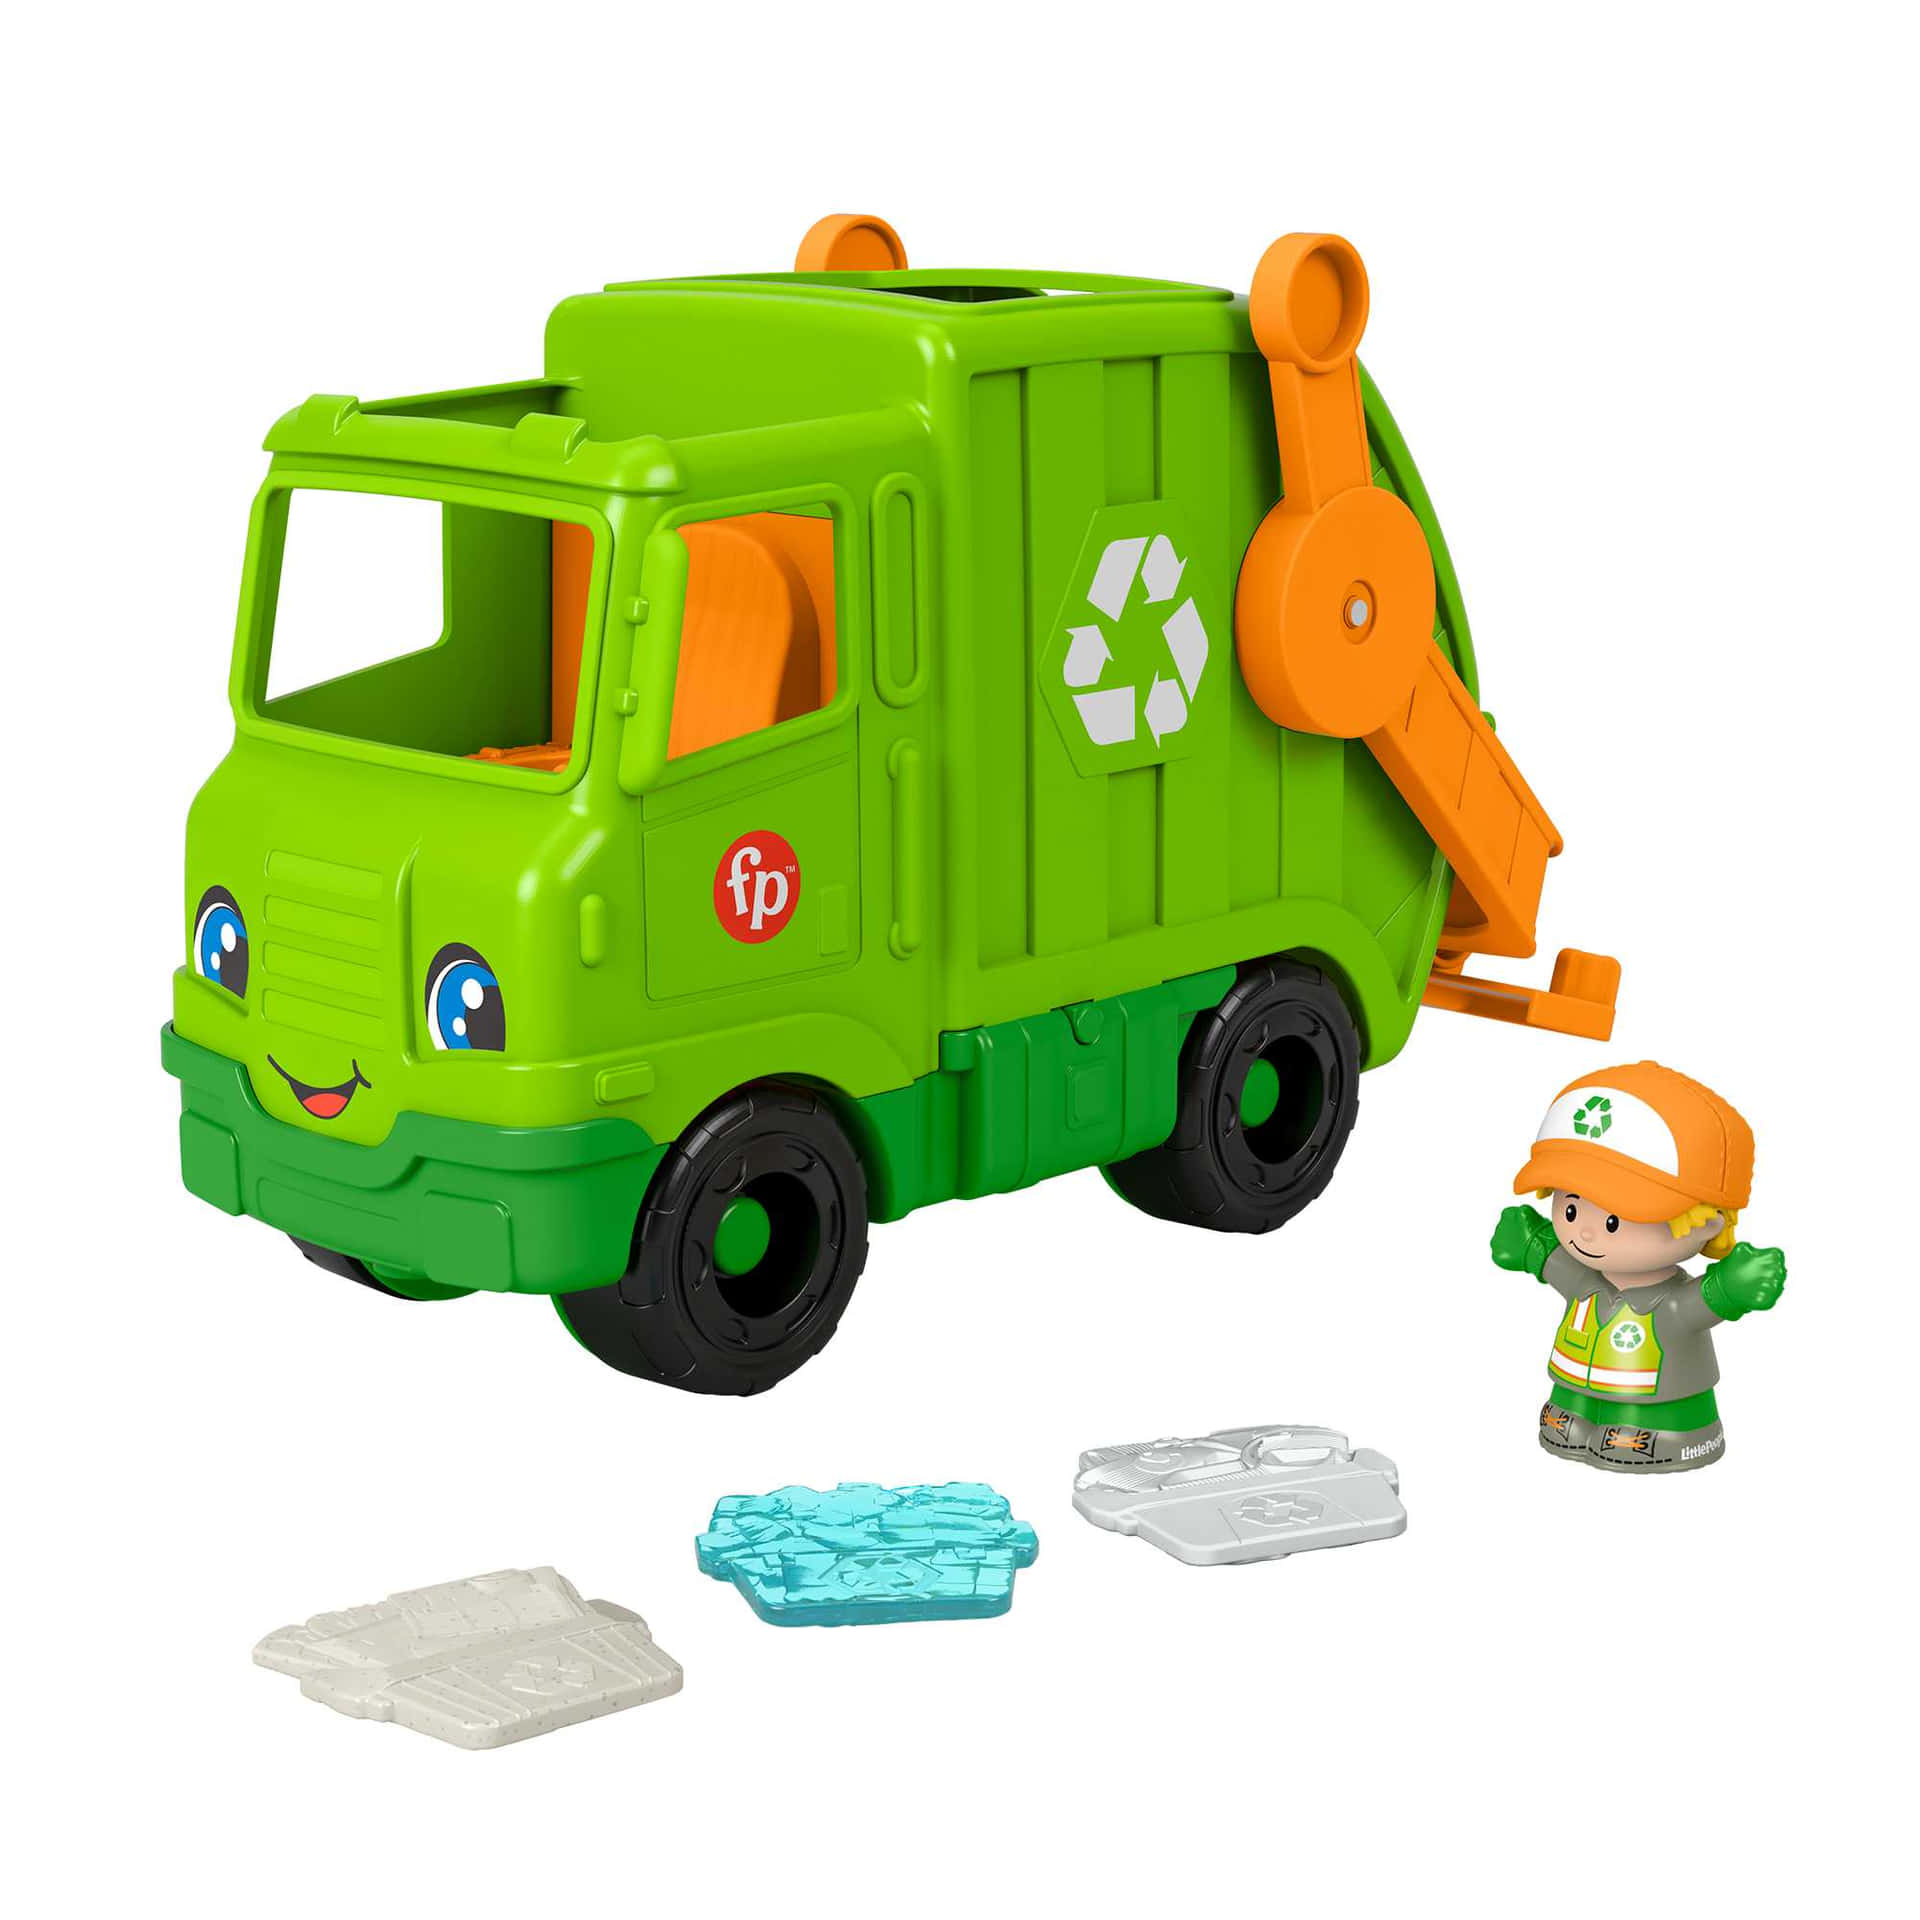 An Up-Close Look at a Garbage Truck